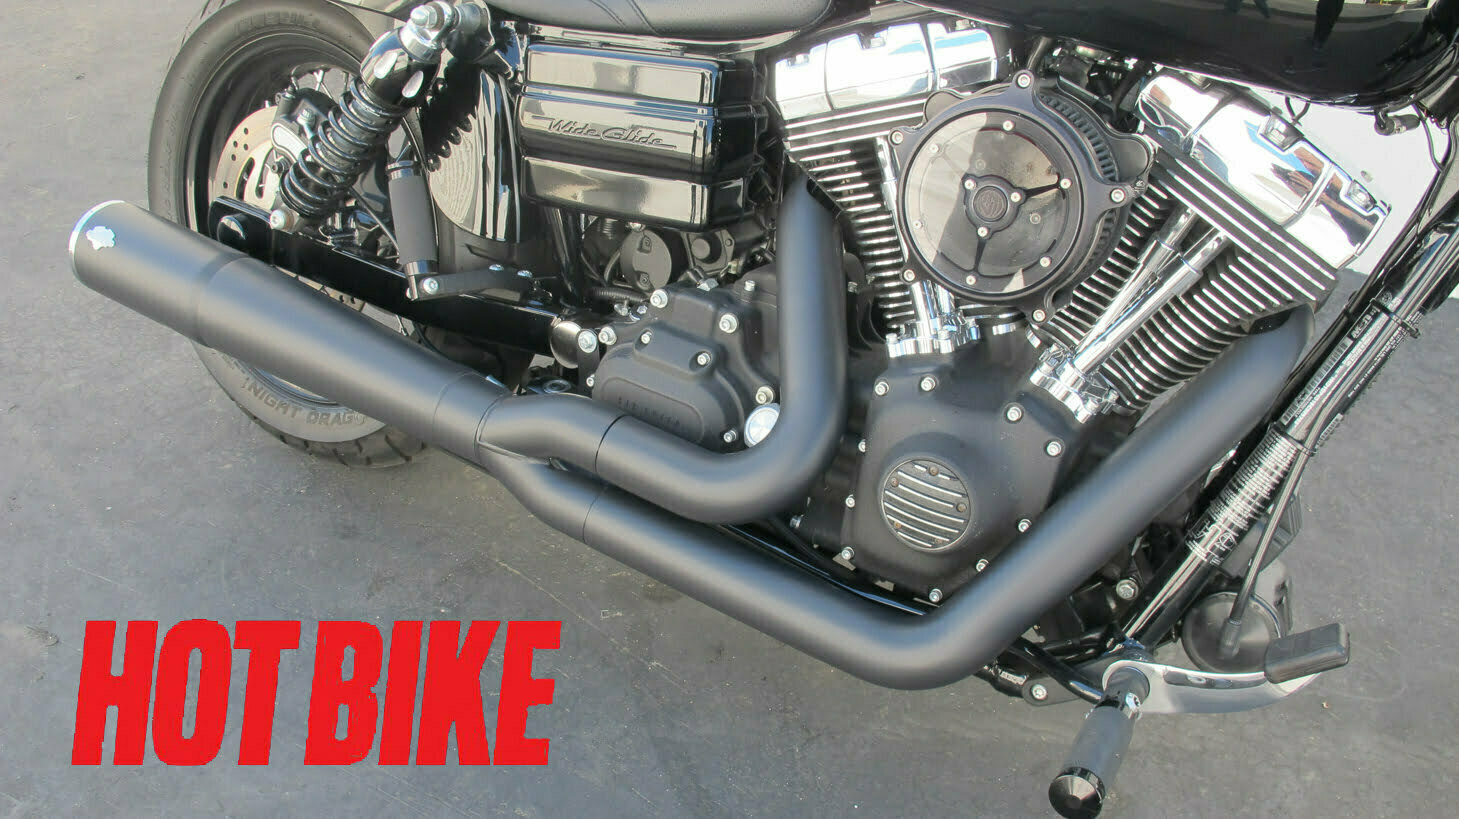 Vance & Hines Pro Pipe install